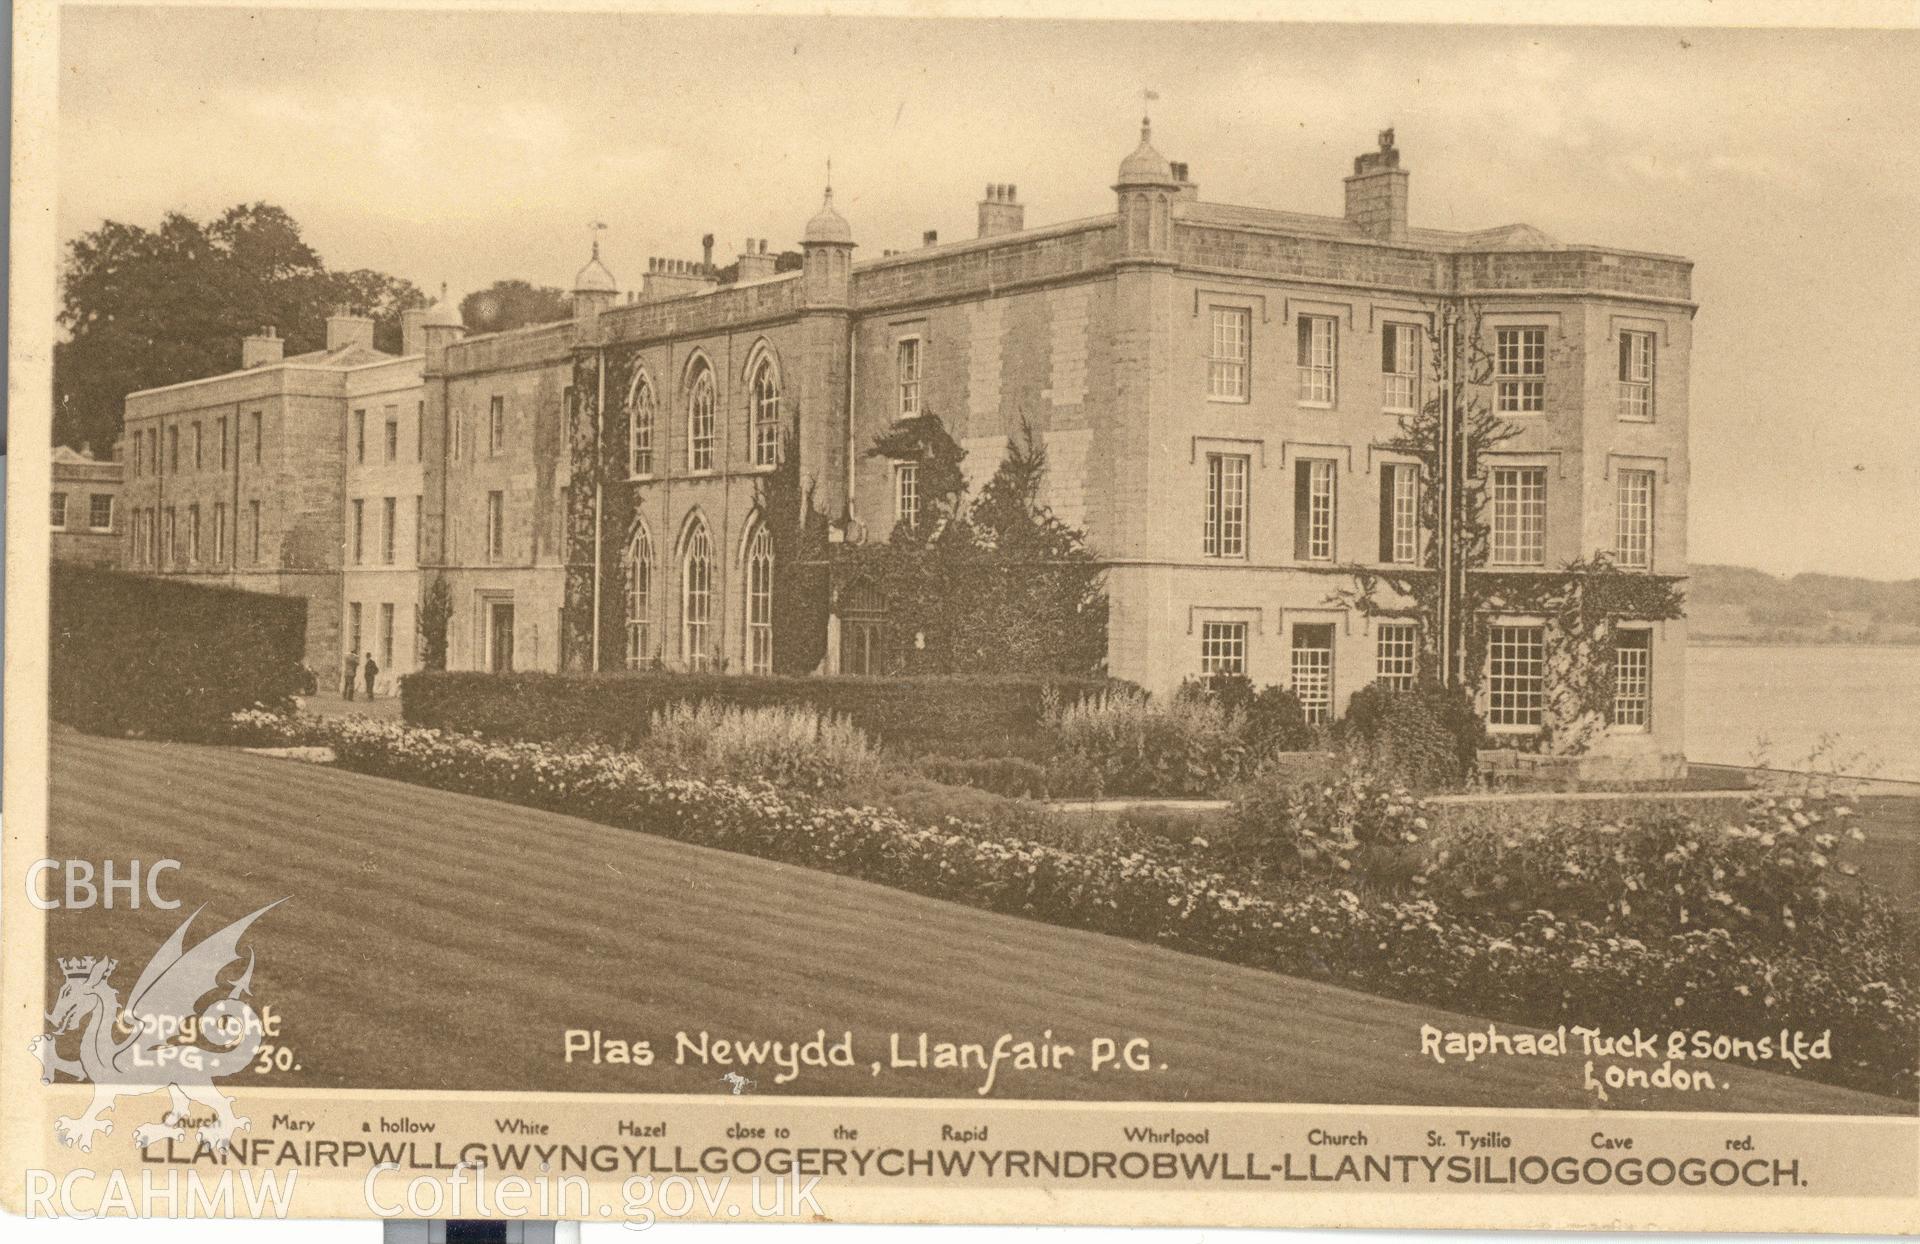 Digitised postcard image of Plas Newydd, Llanddaniel Fab, Raphael Tuck and Sons Ltd. Produced by Parks and Gardens Data Services, from an original item in the Peter Davis Collection at Parks and Gardens UK. We hold only web-resolution images of this collection, suitable for viewing on screen and for research purposes only. We do not hold the original images, or publication quality scans.